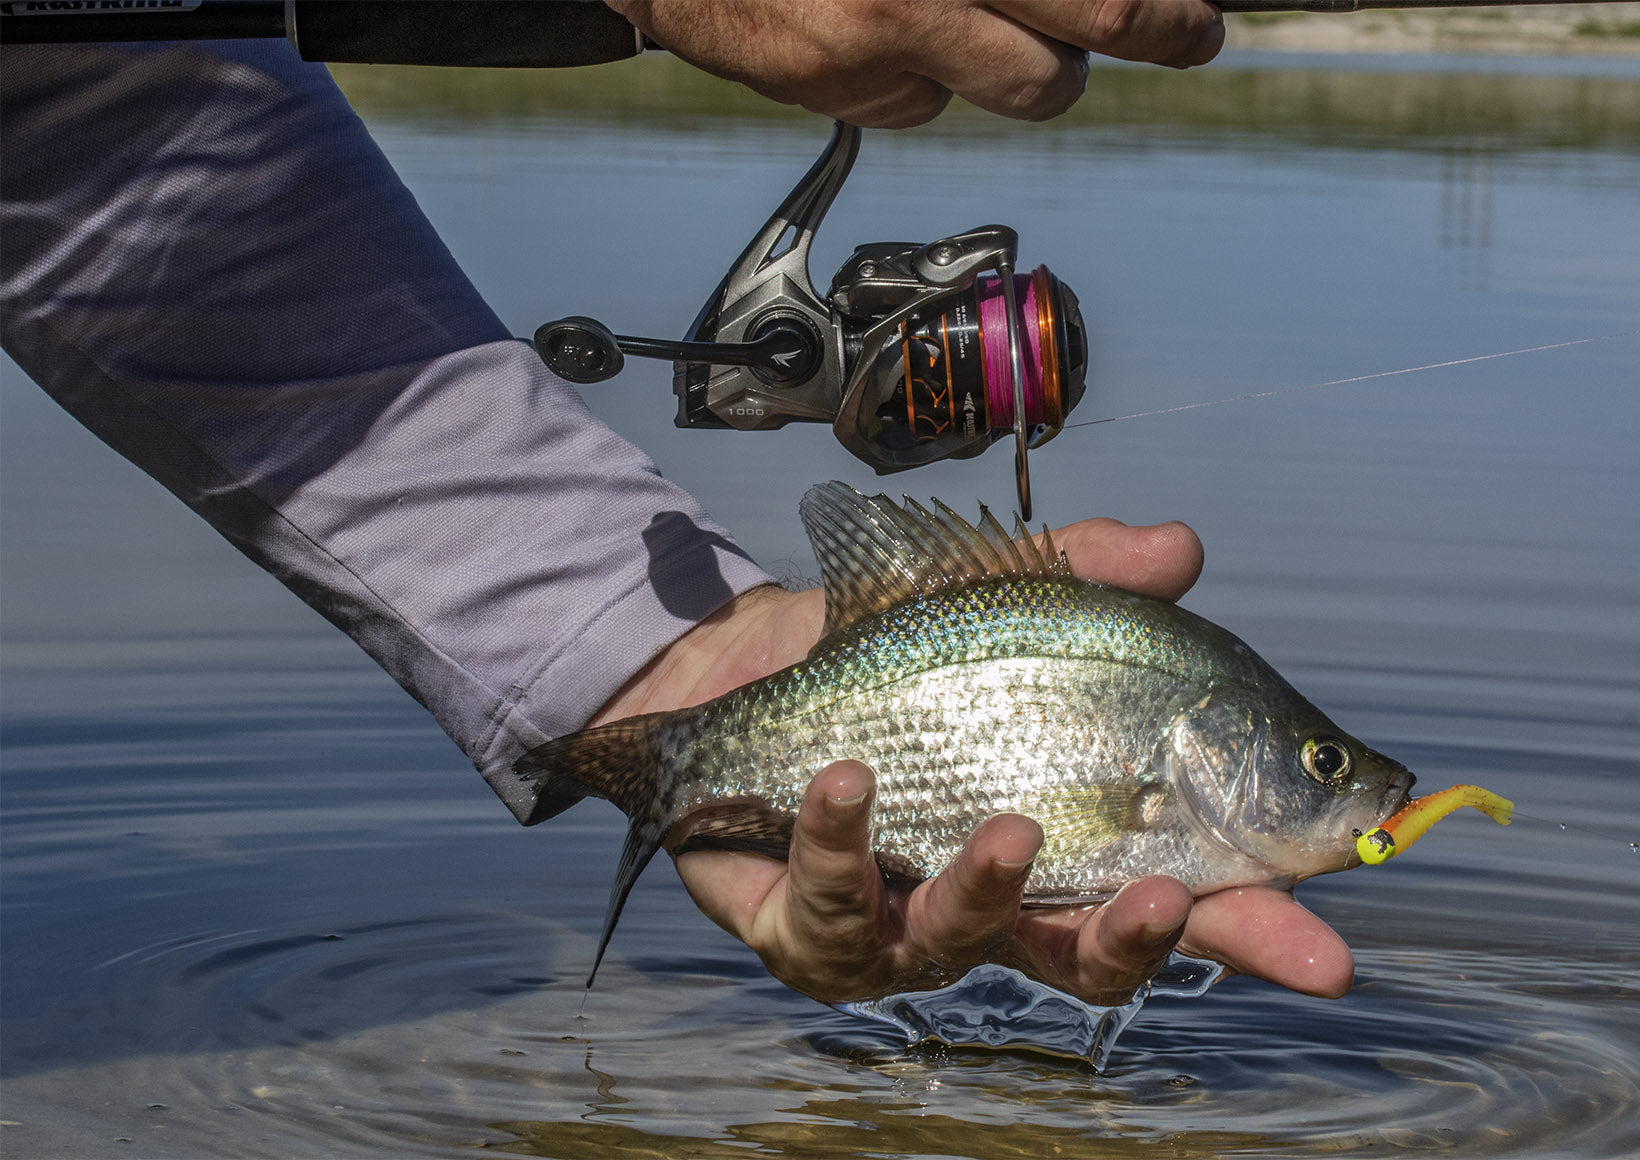 Buyer's Guide: BFS (Bait Finesse System) Rod and Reel Combos